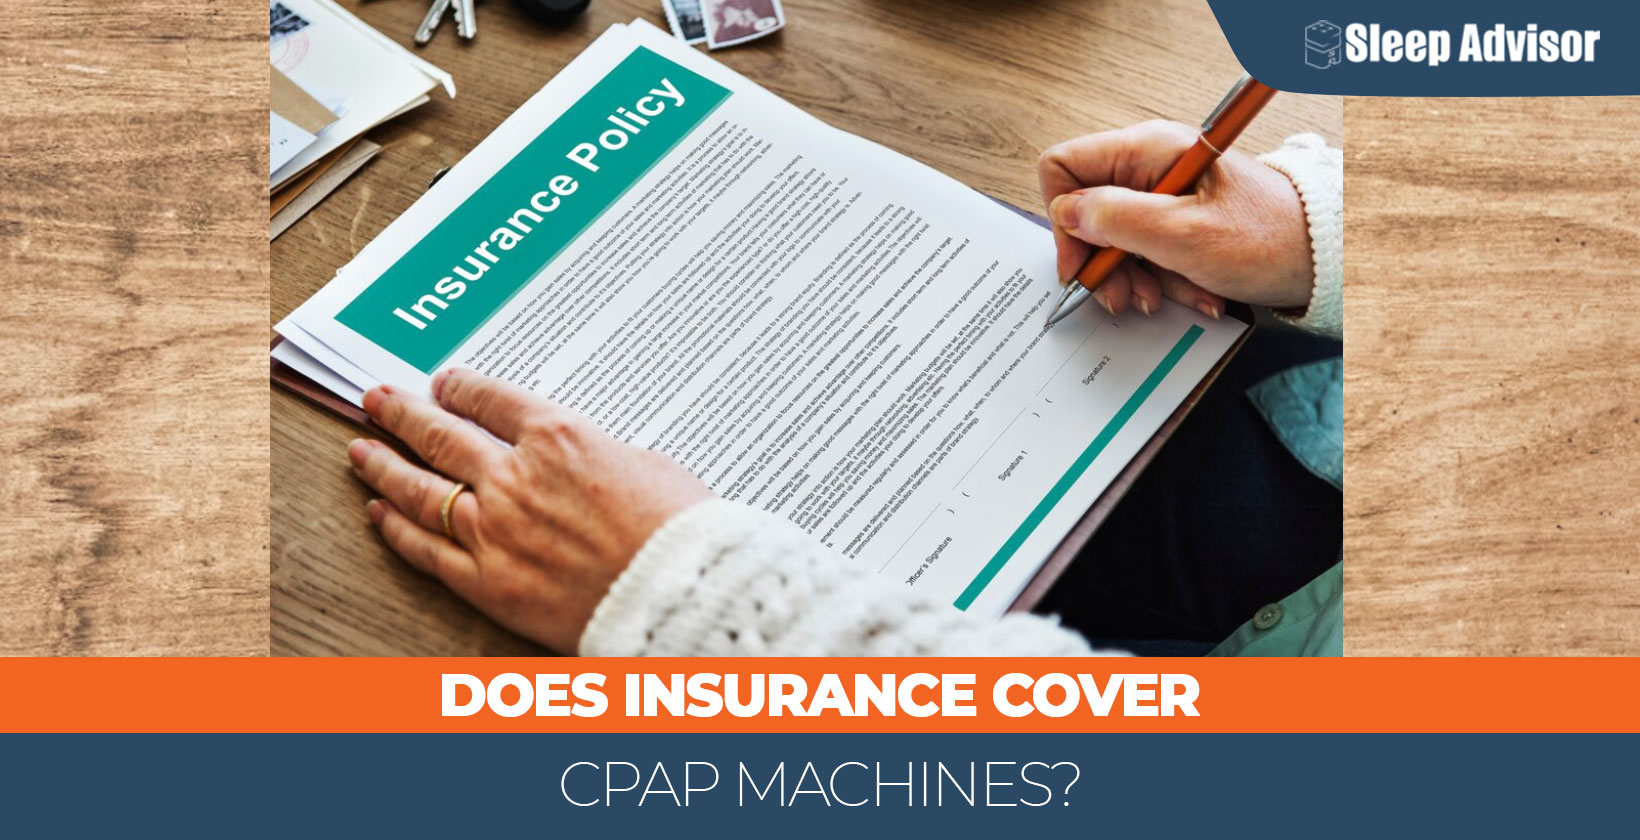 Does Insurance Cover CPAP Machines?